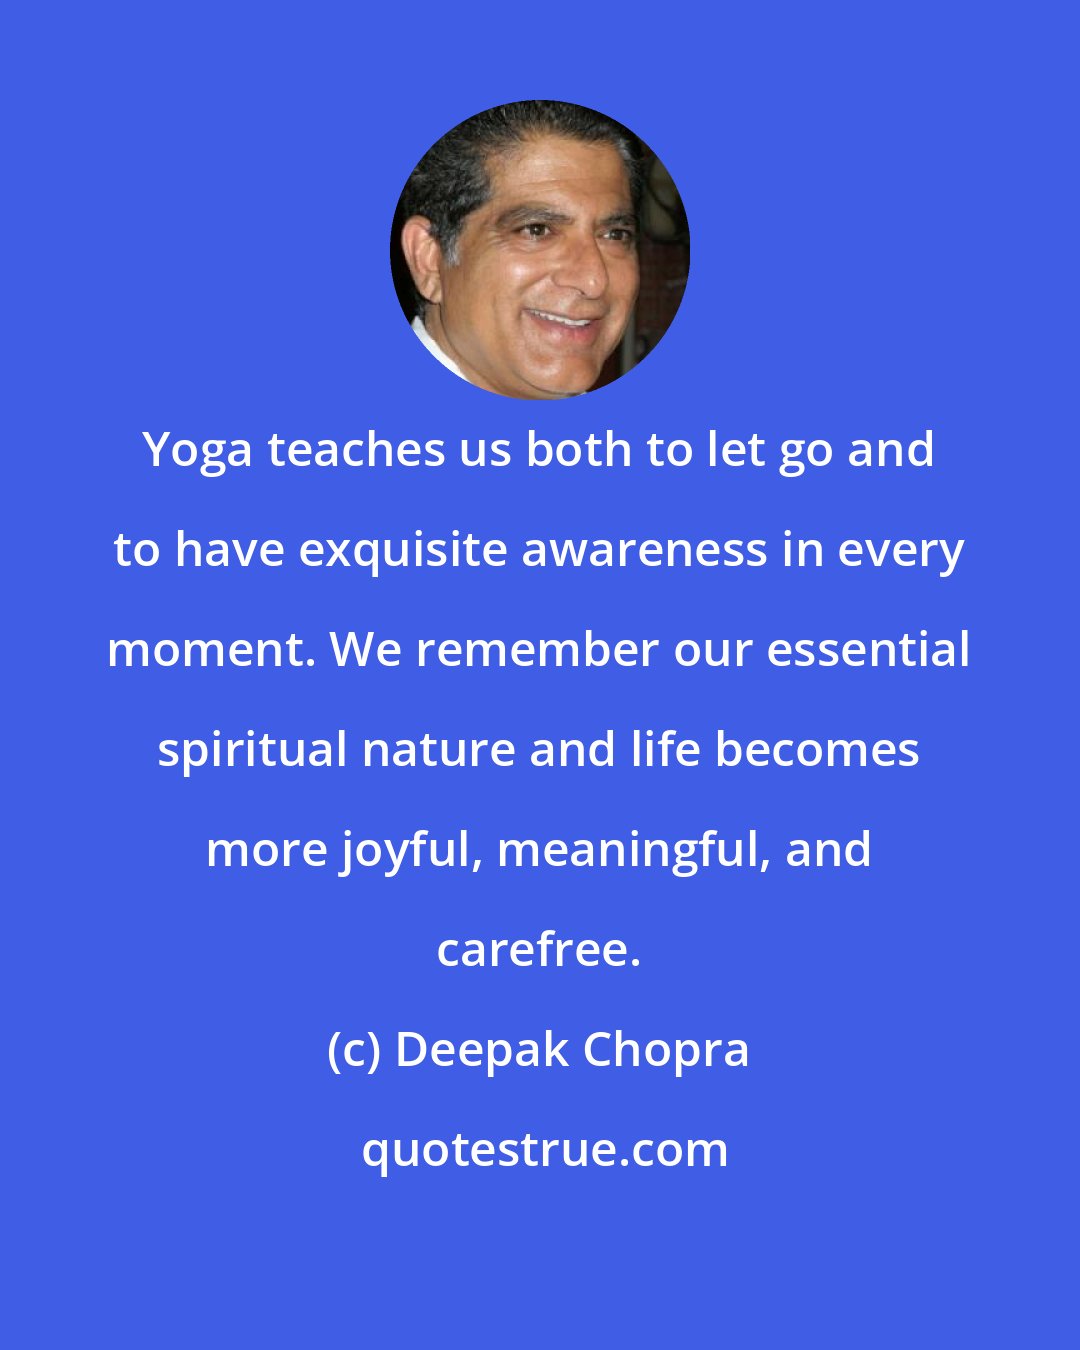 Deepak Chopra: Yoga teaches us both to let go and to have exquisite awareness in every moment. We remember our essential spiritual nature and life becomes more joyful, meaningful, and carefree.